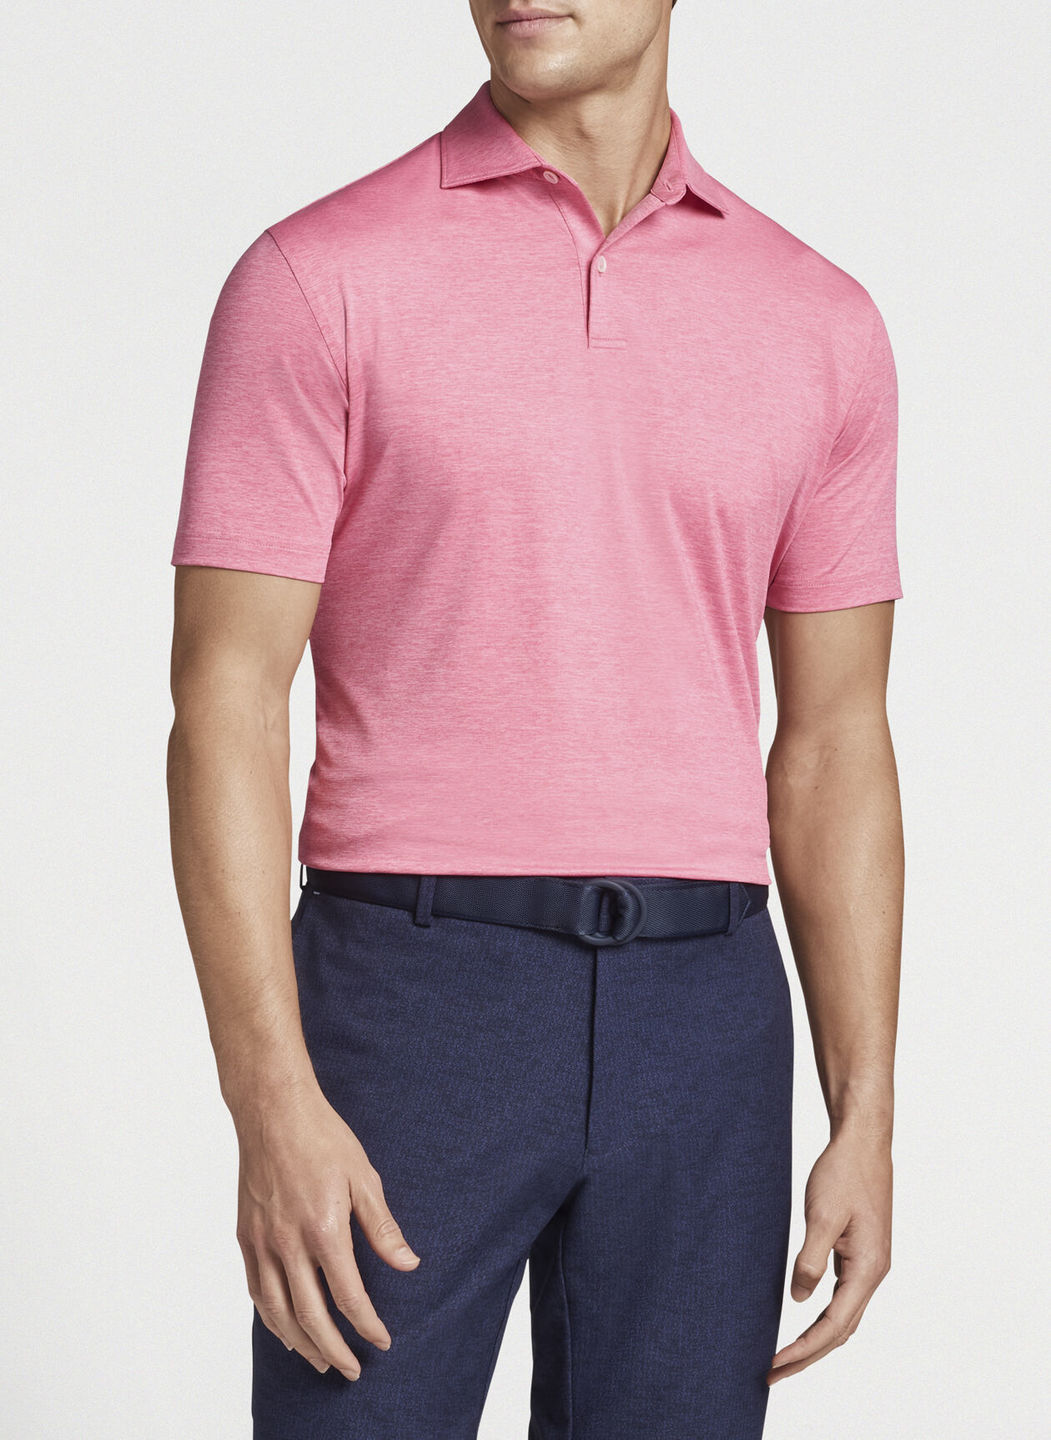 Solid Performance Jersey Polo - Begonia | Peter Millar